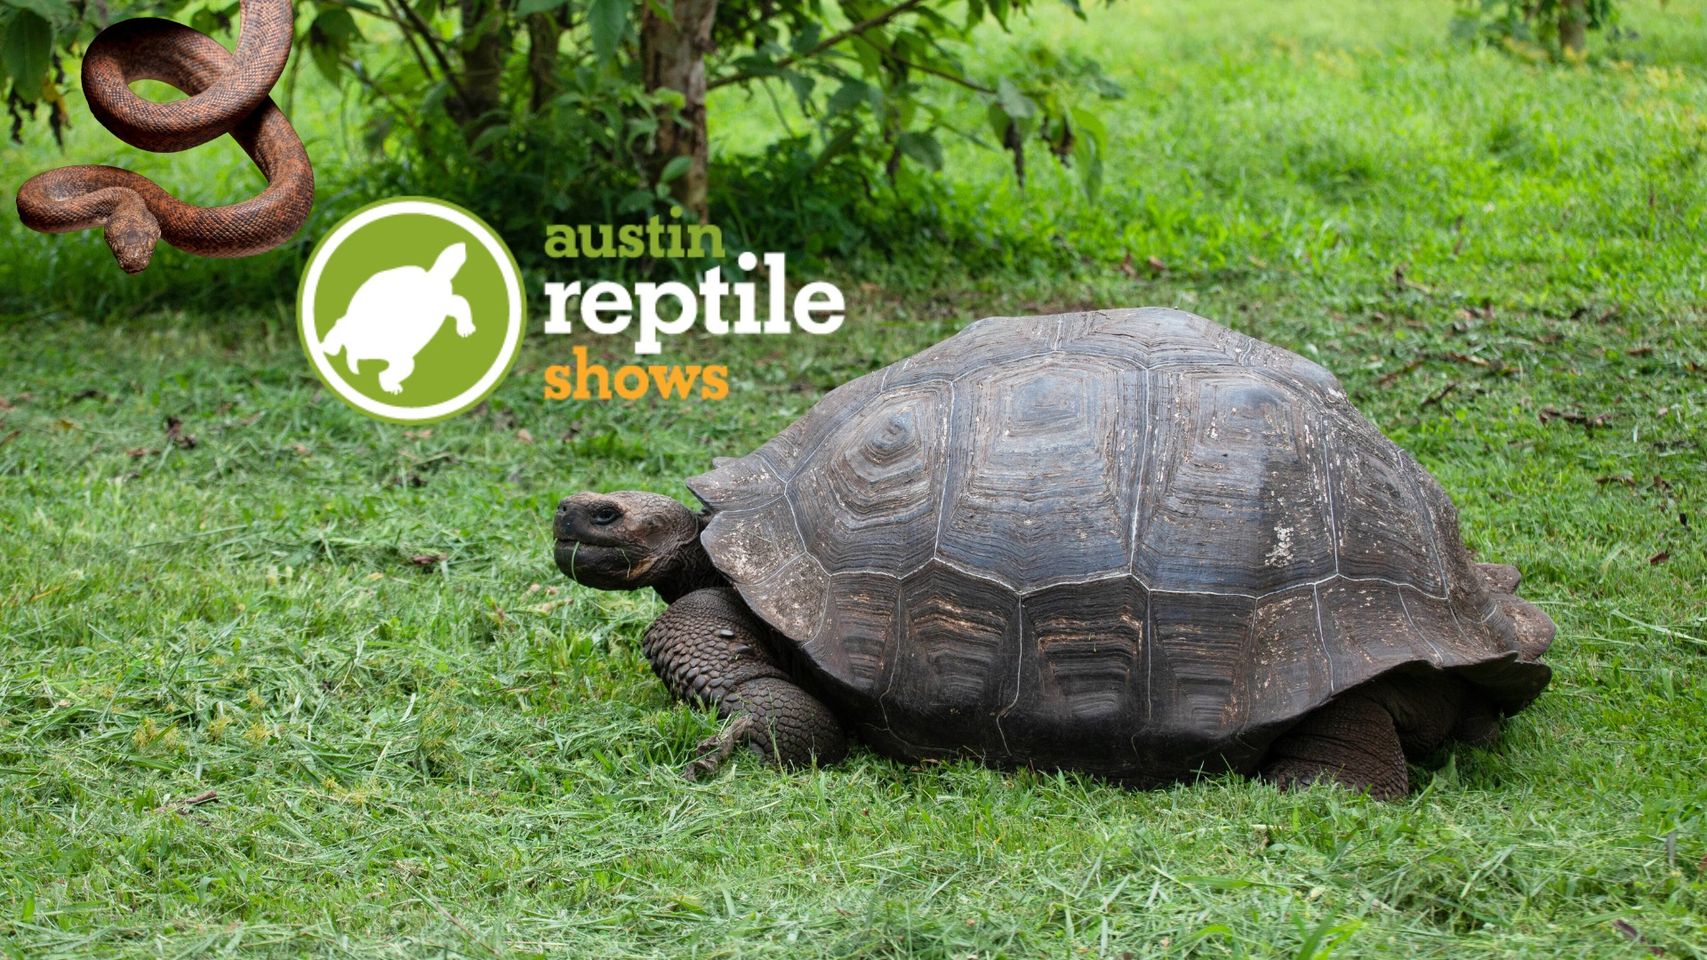 Austin Reptile Shoe at The Library At Cedar Creek Lake 1 austin reptile shows CedarCreekLake.Online